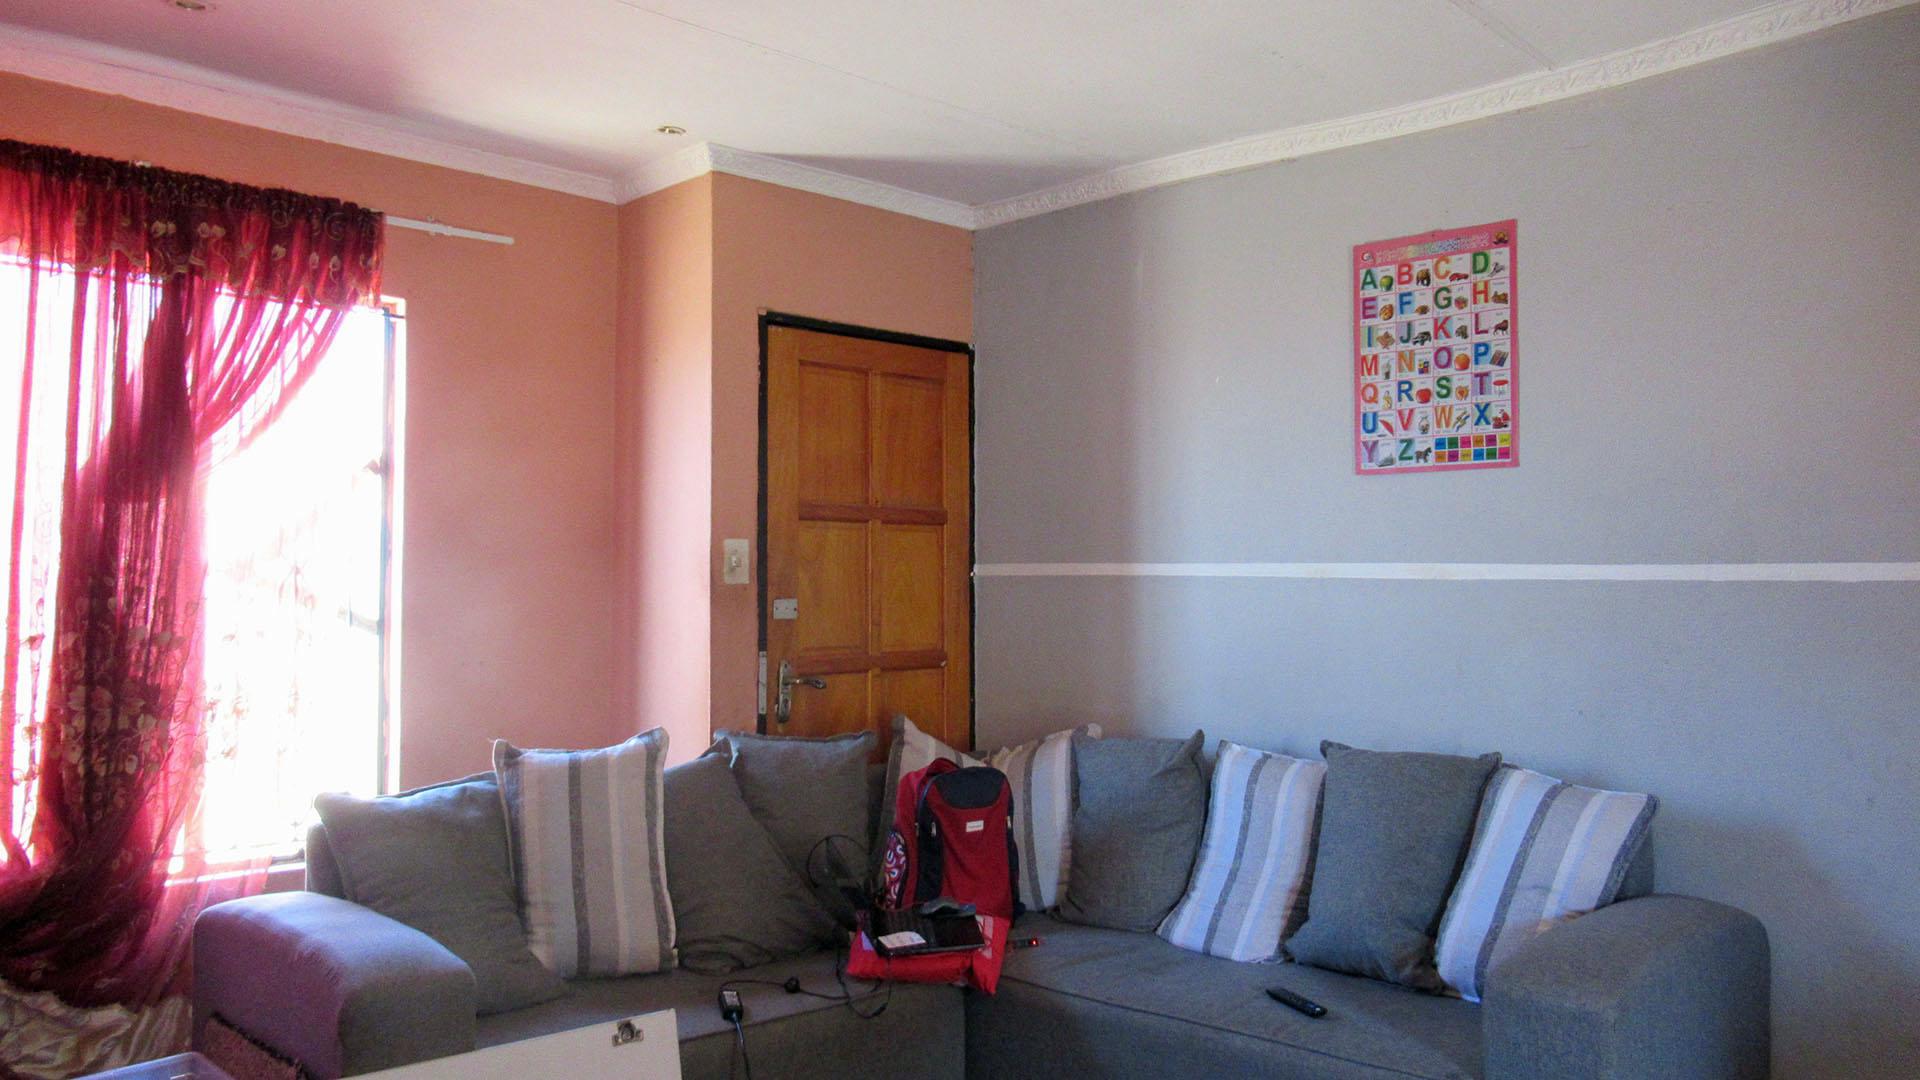 Lounges - 14 square meters of property in Naturena